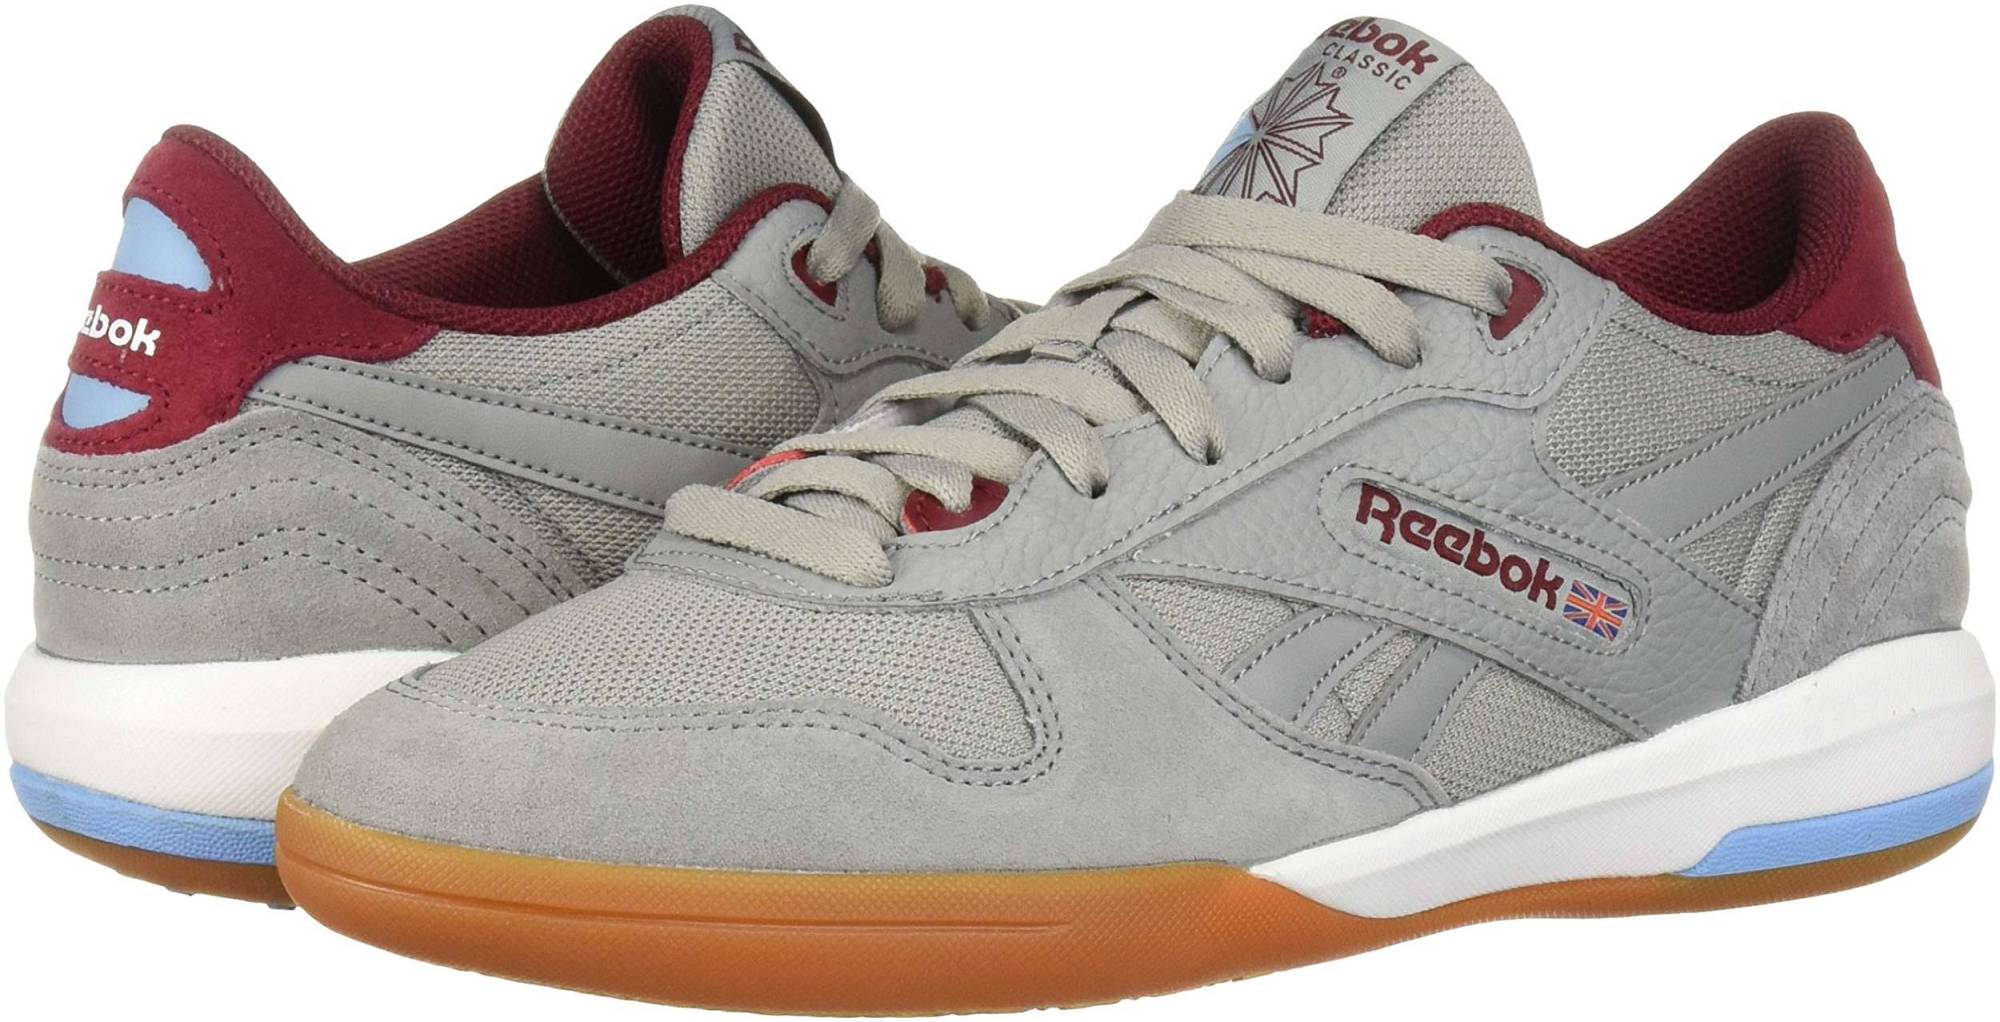 Reebok Unphased Pro – Shoes Reviews 